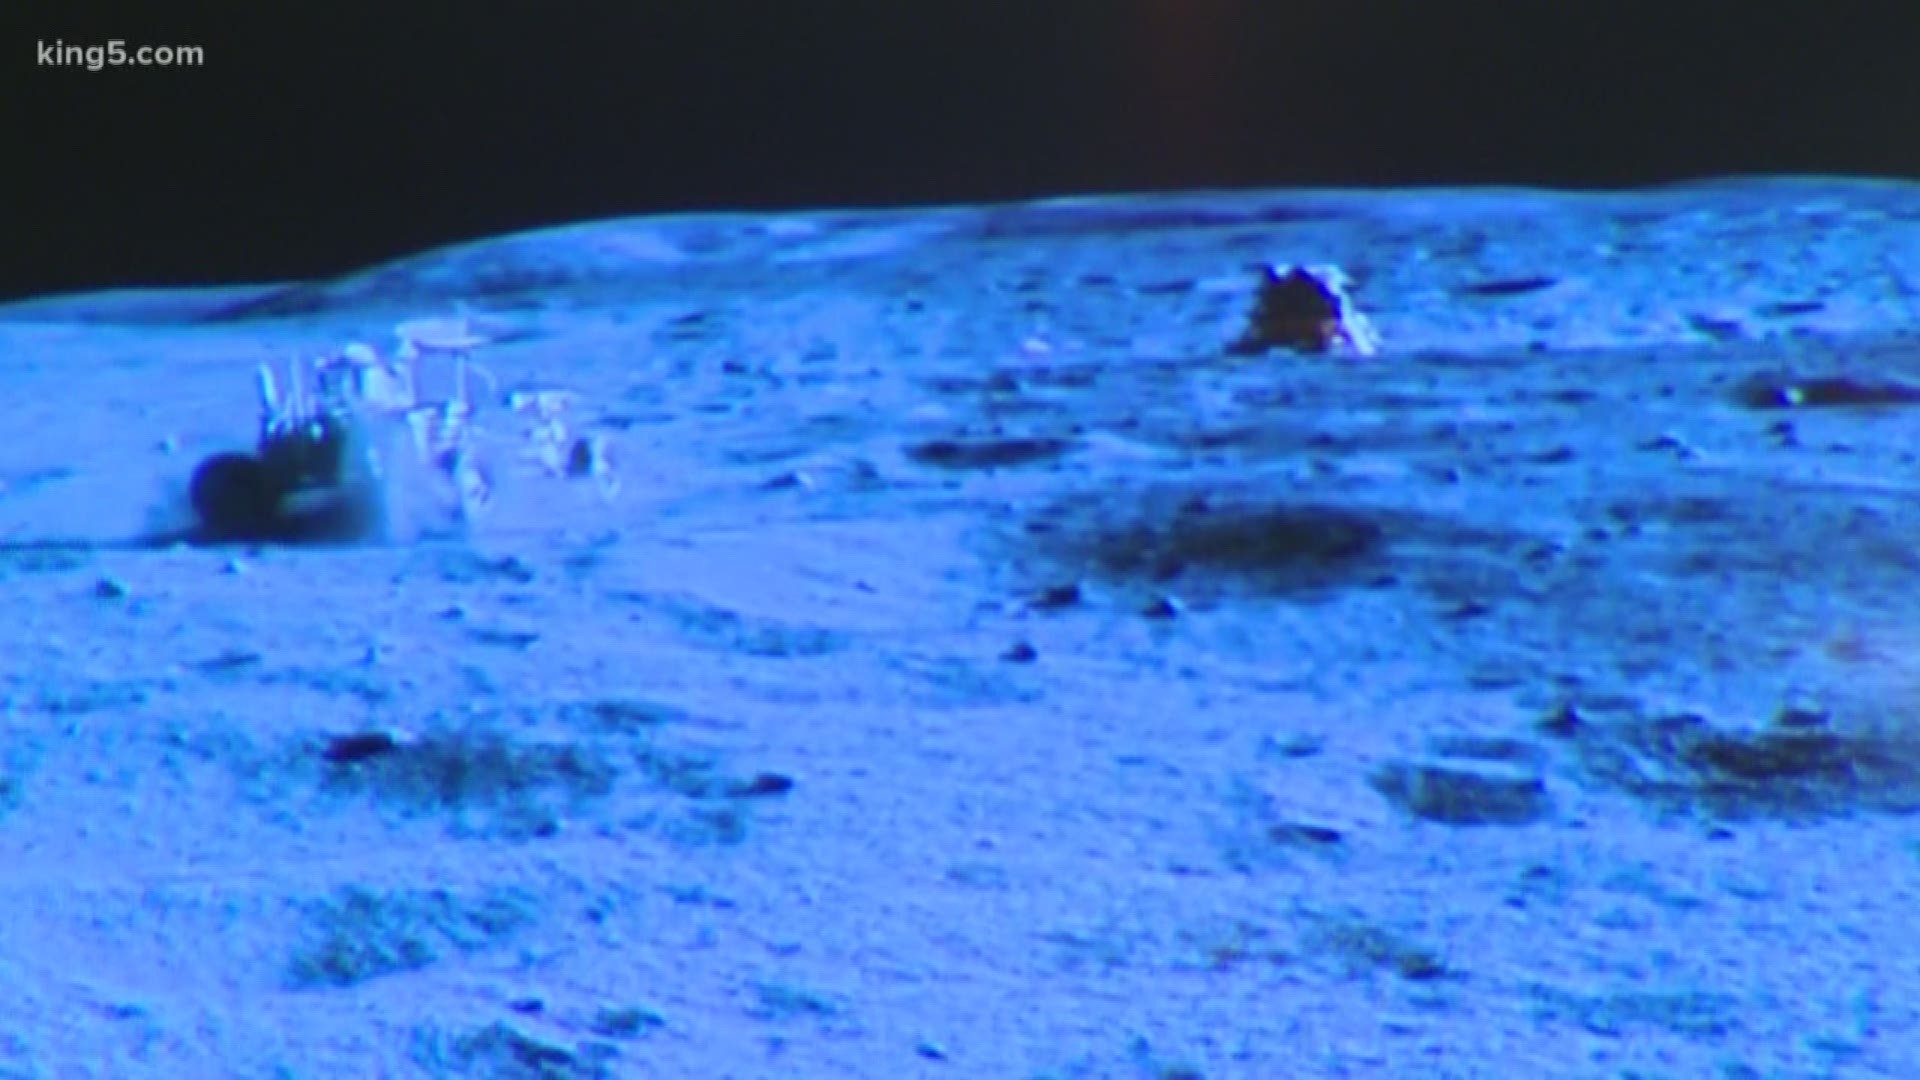 The King County Landmark Commission has designated the Apollo Lunar Rovers as historic landmarks. Both were developed in Kent for the lunar missions. The rovers gave astronauts the ability to travel miles away from the lunar landing module.